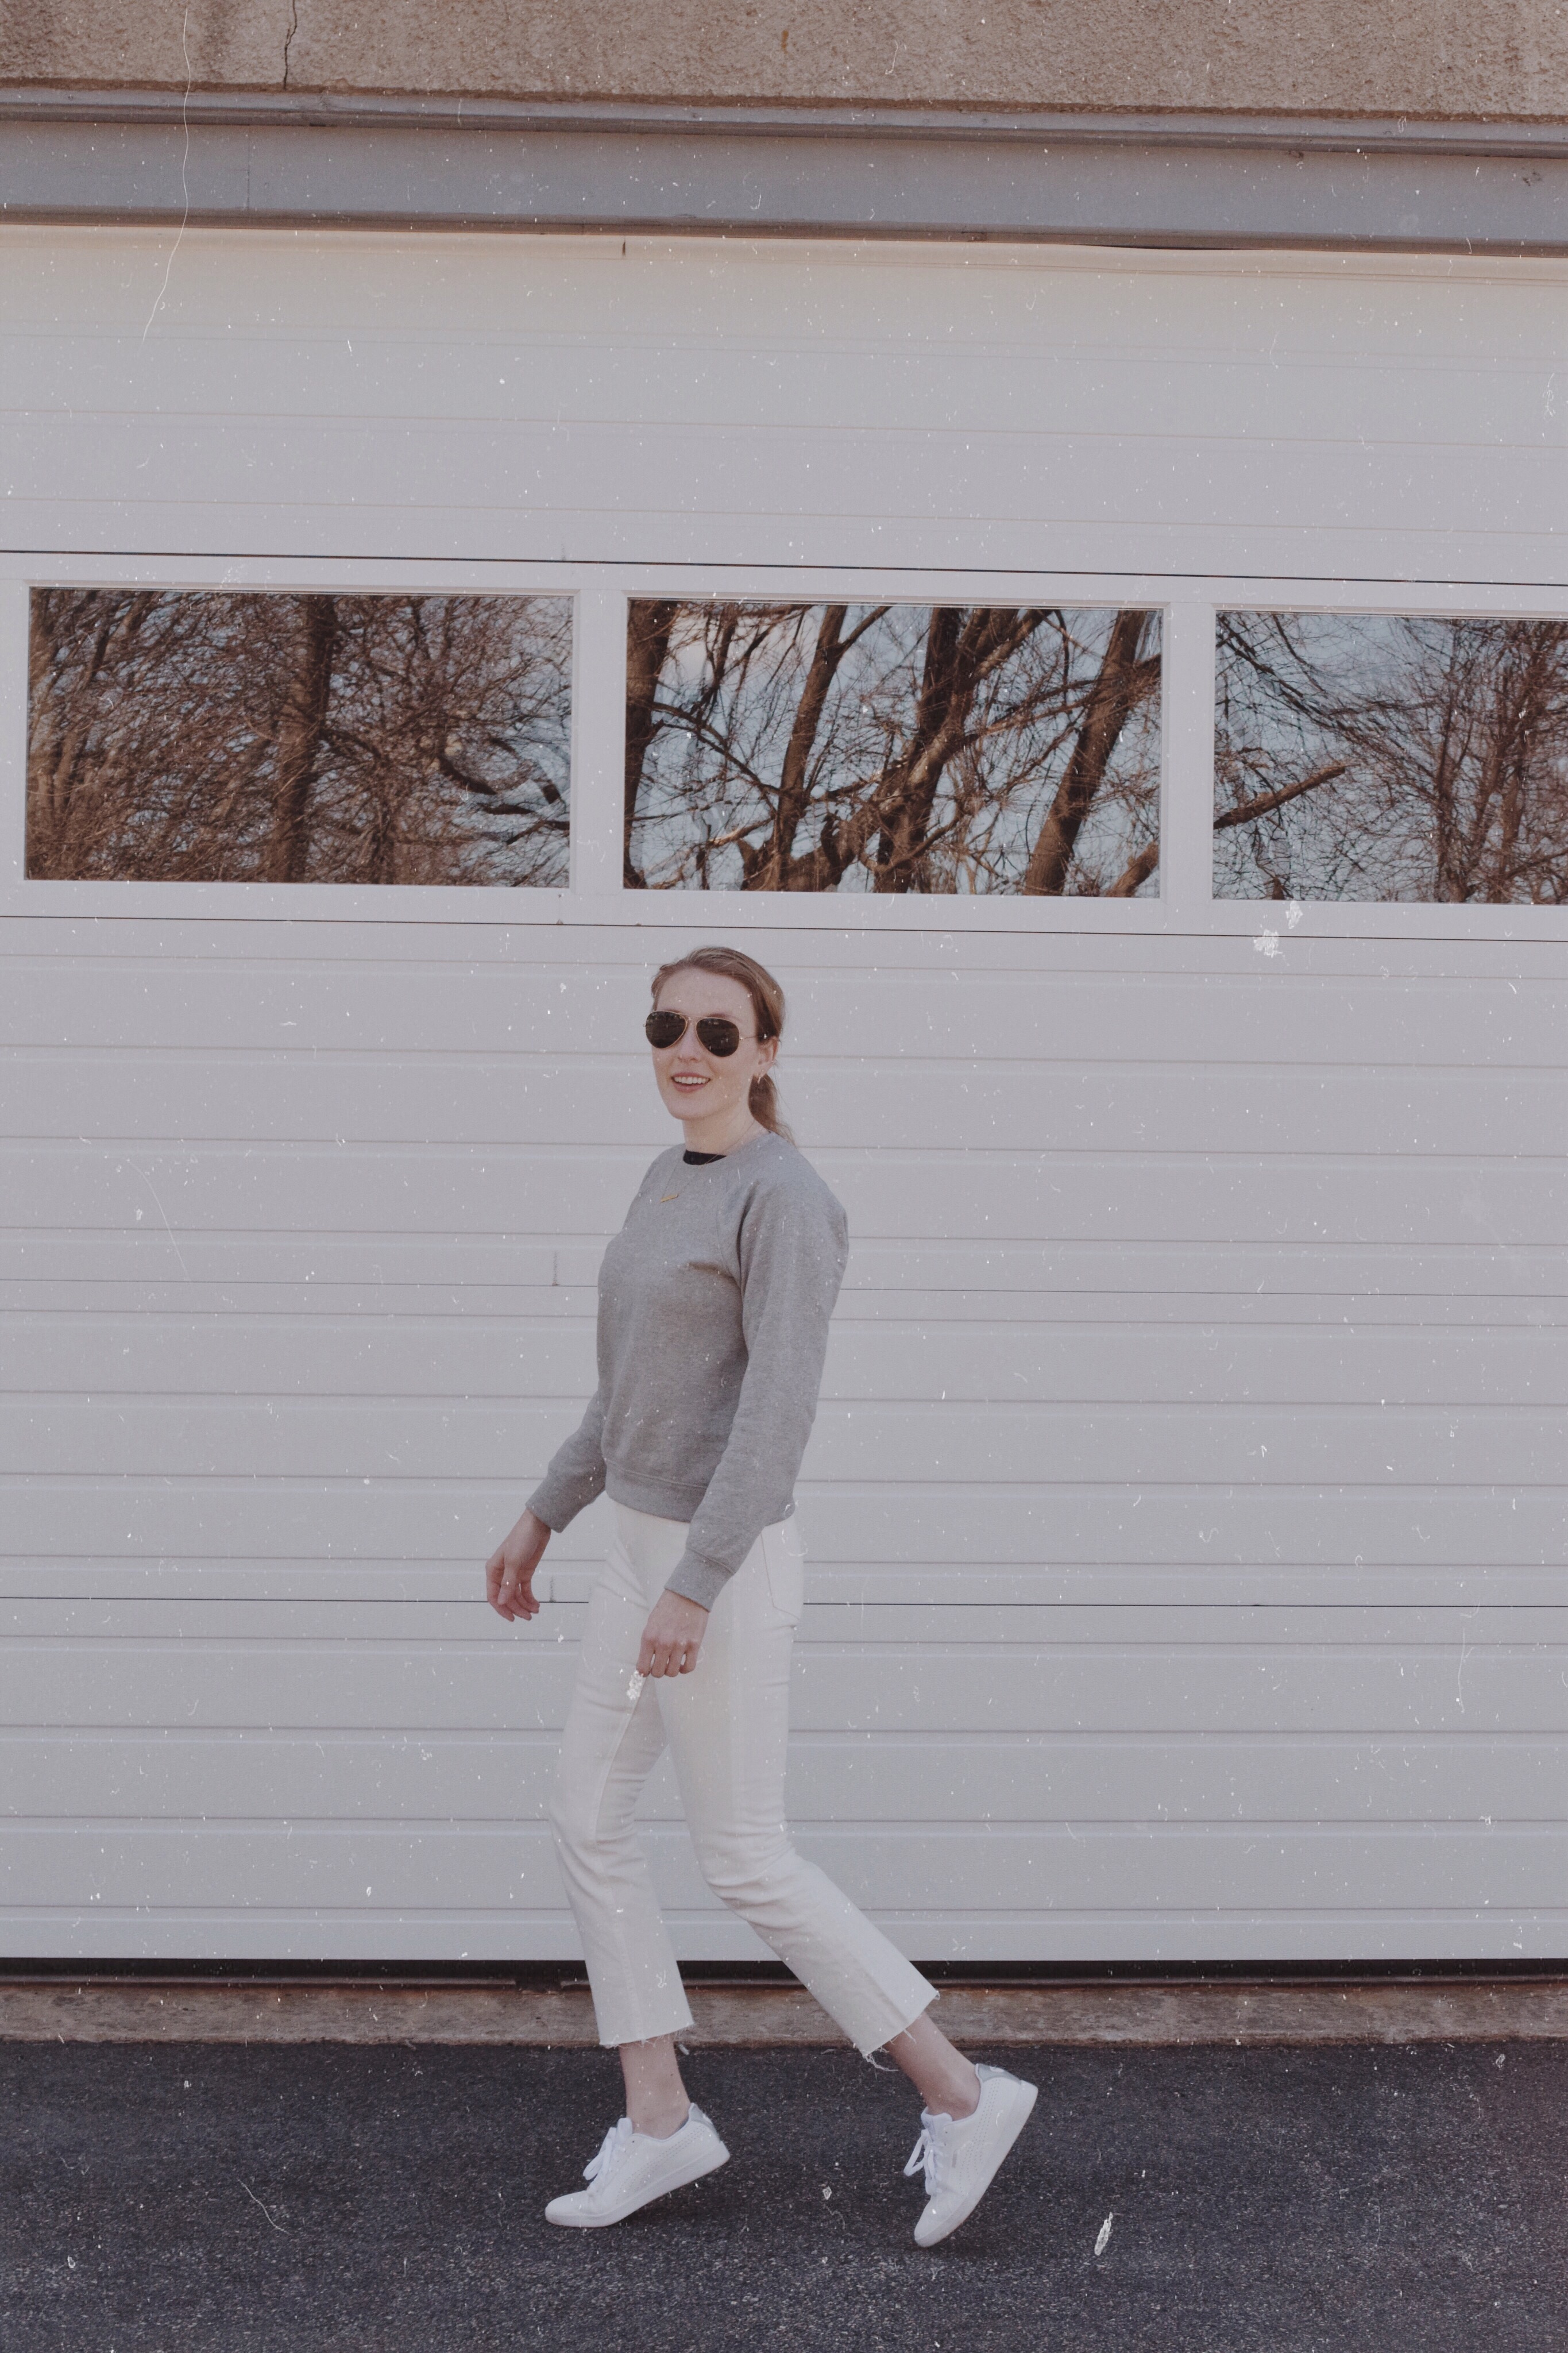 styling casual weekend neutrals for spring with Everlane jeans, crewneck sweatshirt, white sneakers, and aviators